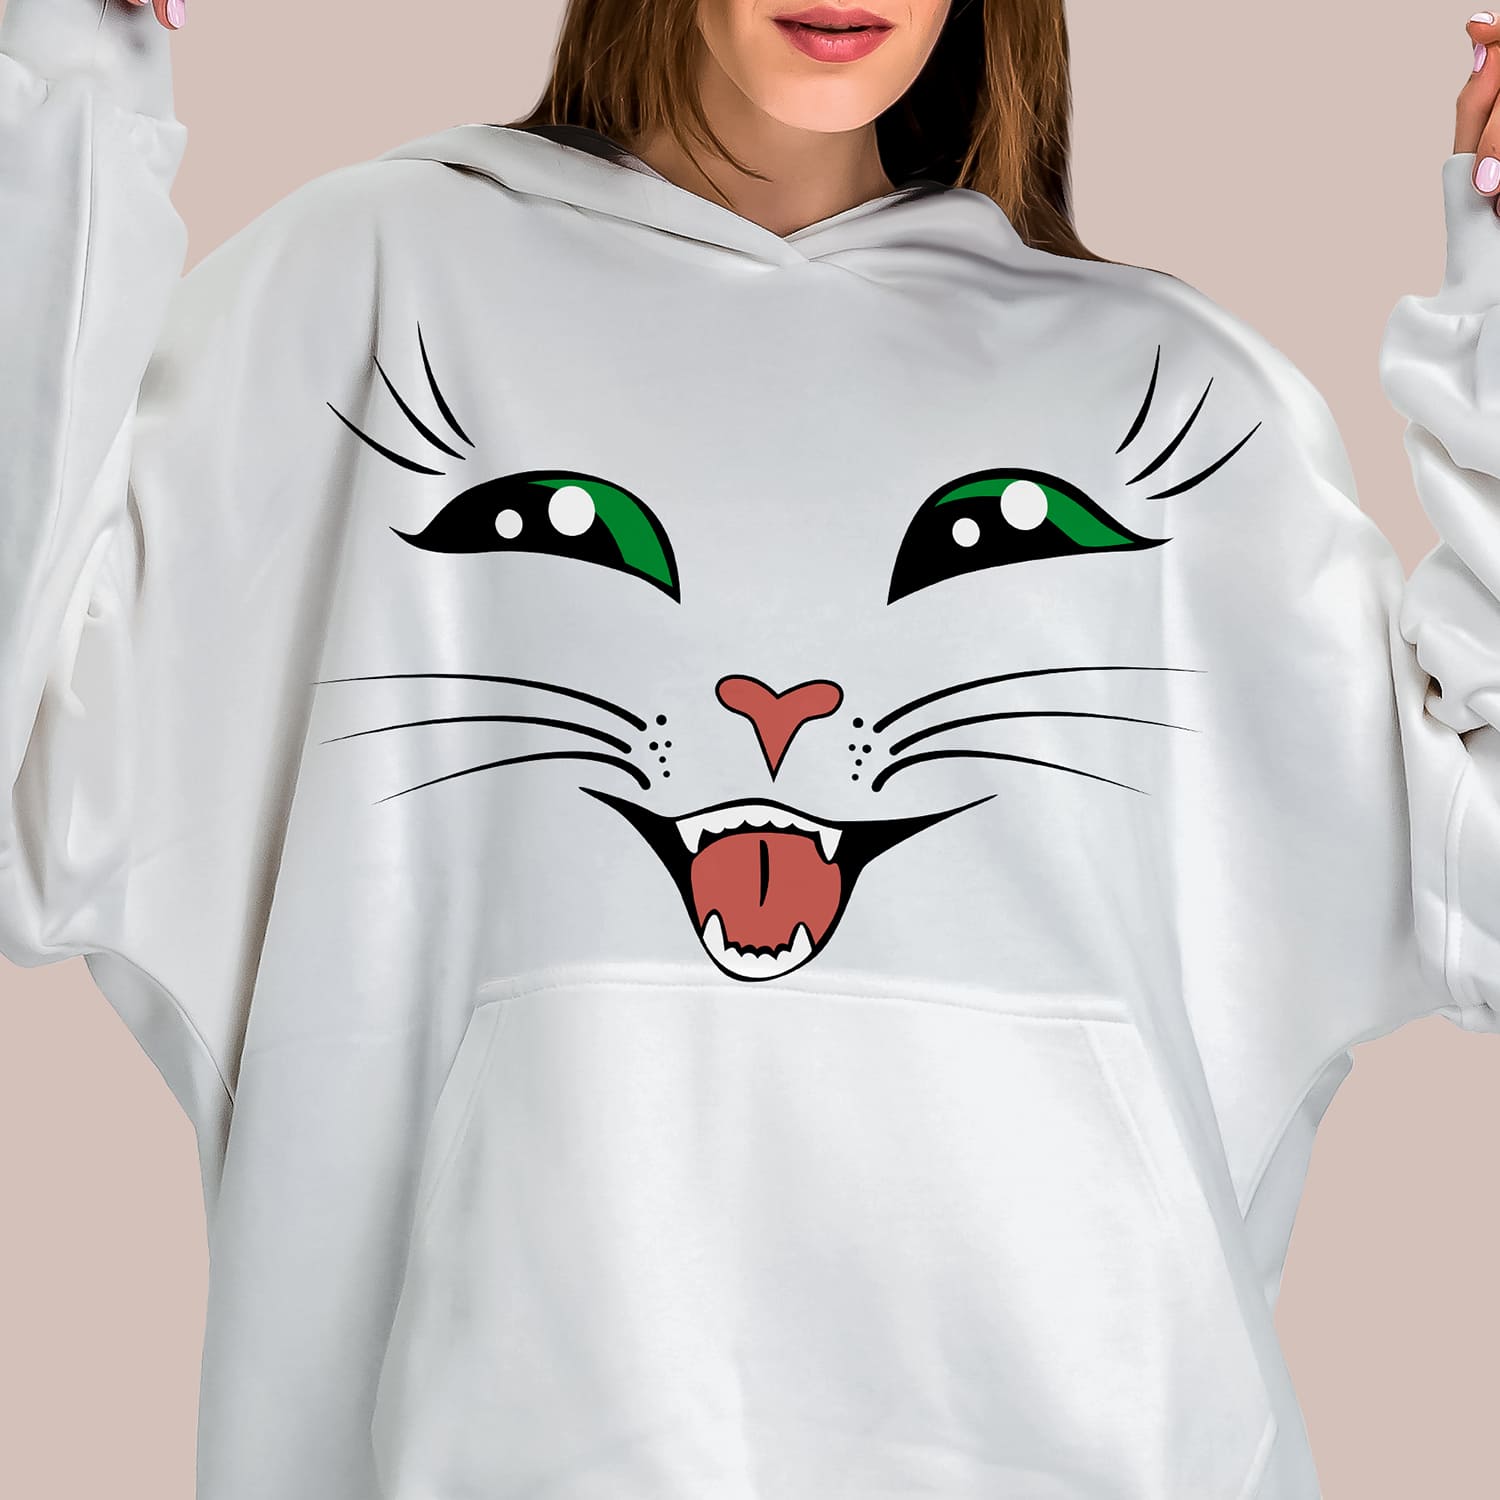 Woman wearing a white hoodie with a cat face on it.